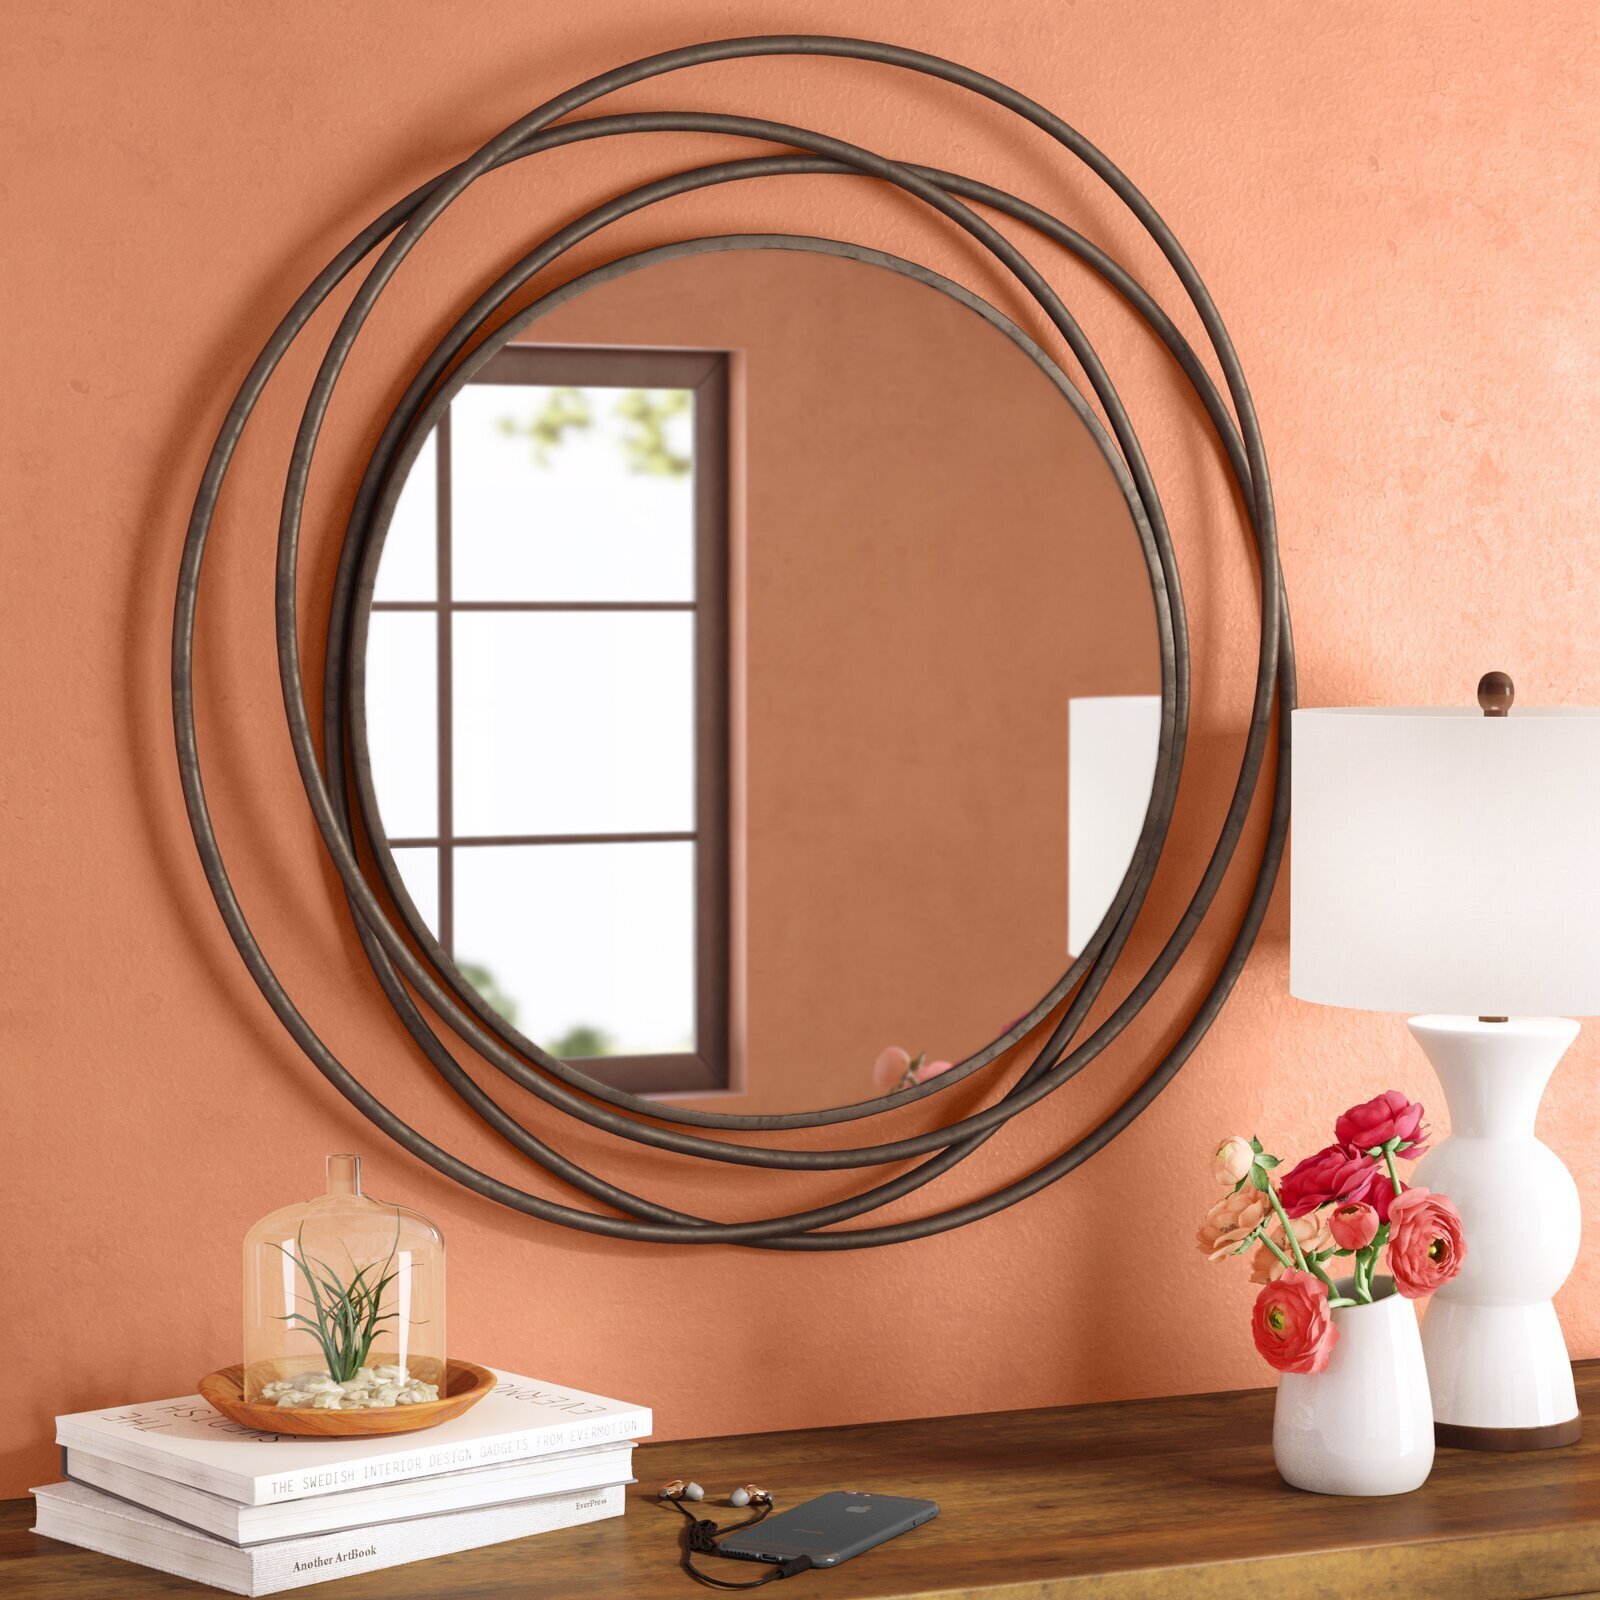 Mirror frame with several circles